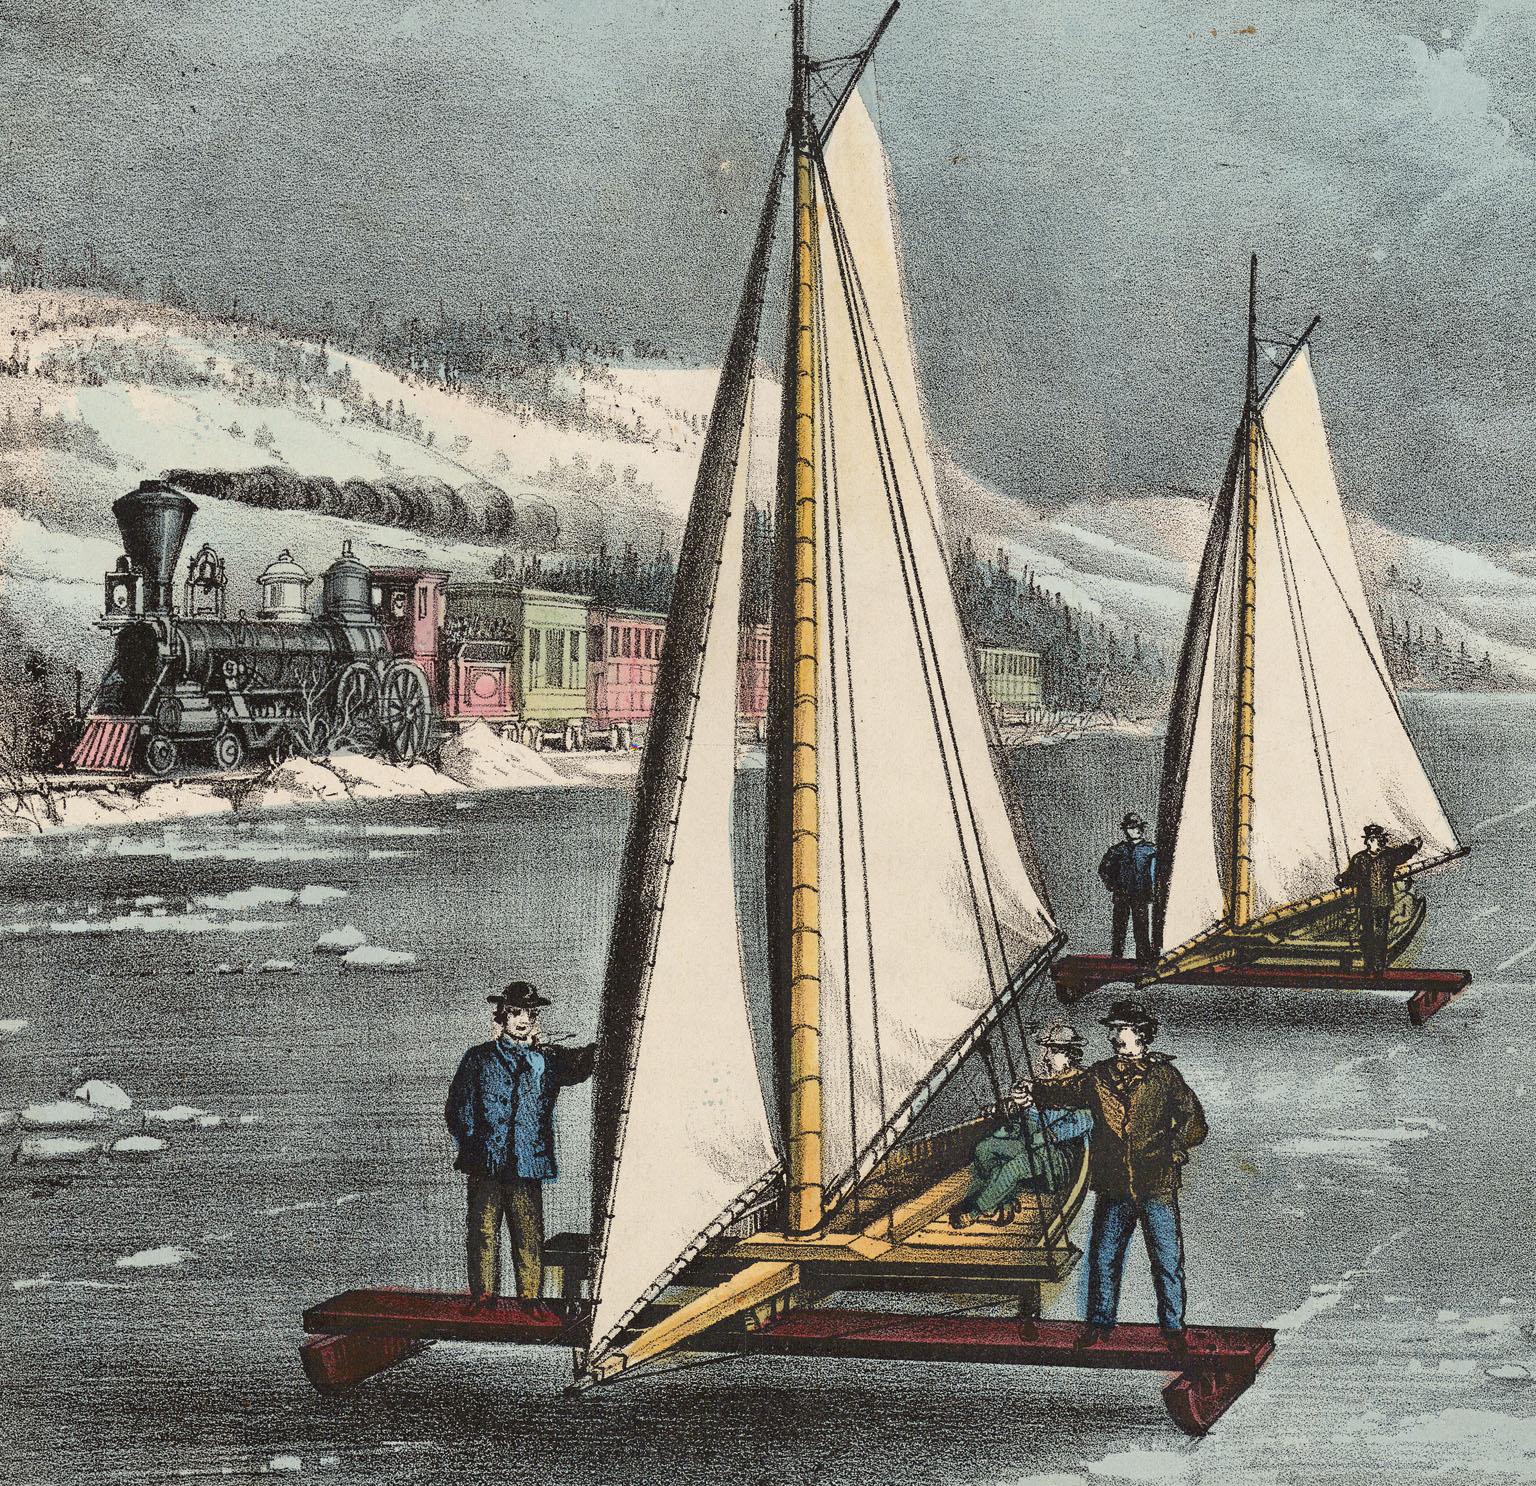 Ice-Boat Race on the Hudson. - American Realist Print by Currier & Ives